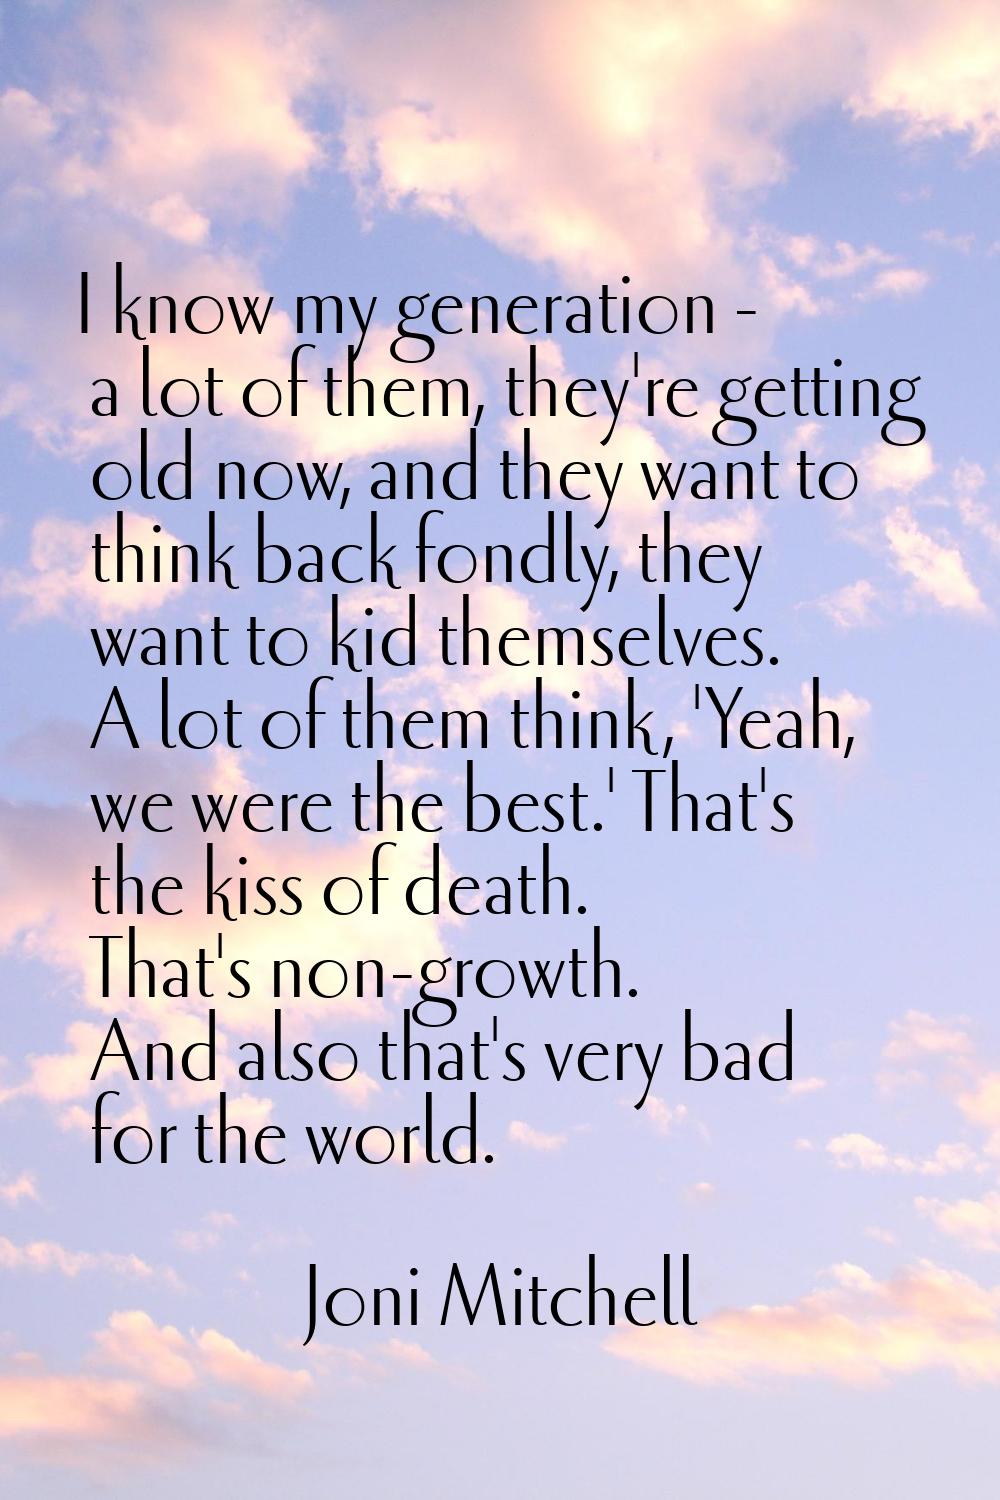 I know my generation - a lot of them, they're getting old now, and they want to think back fondly, 